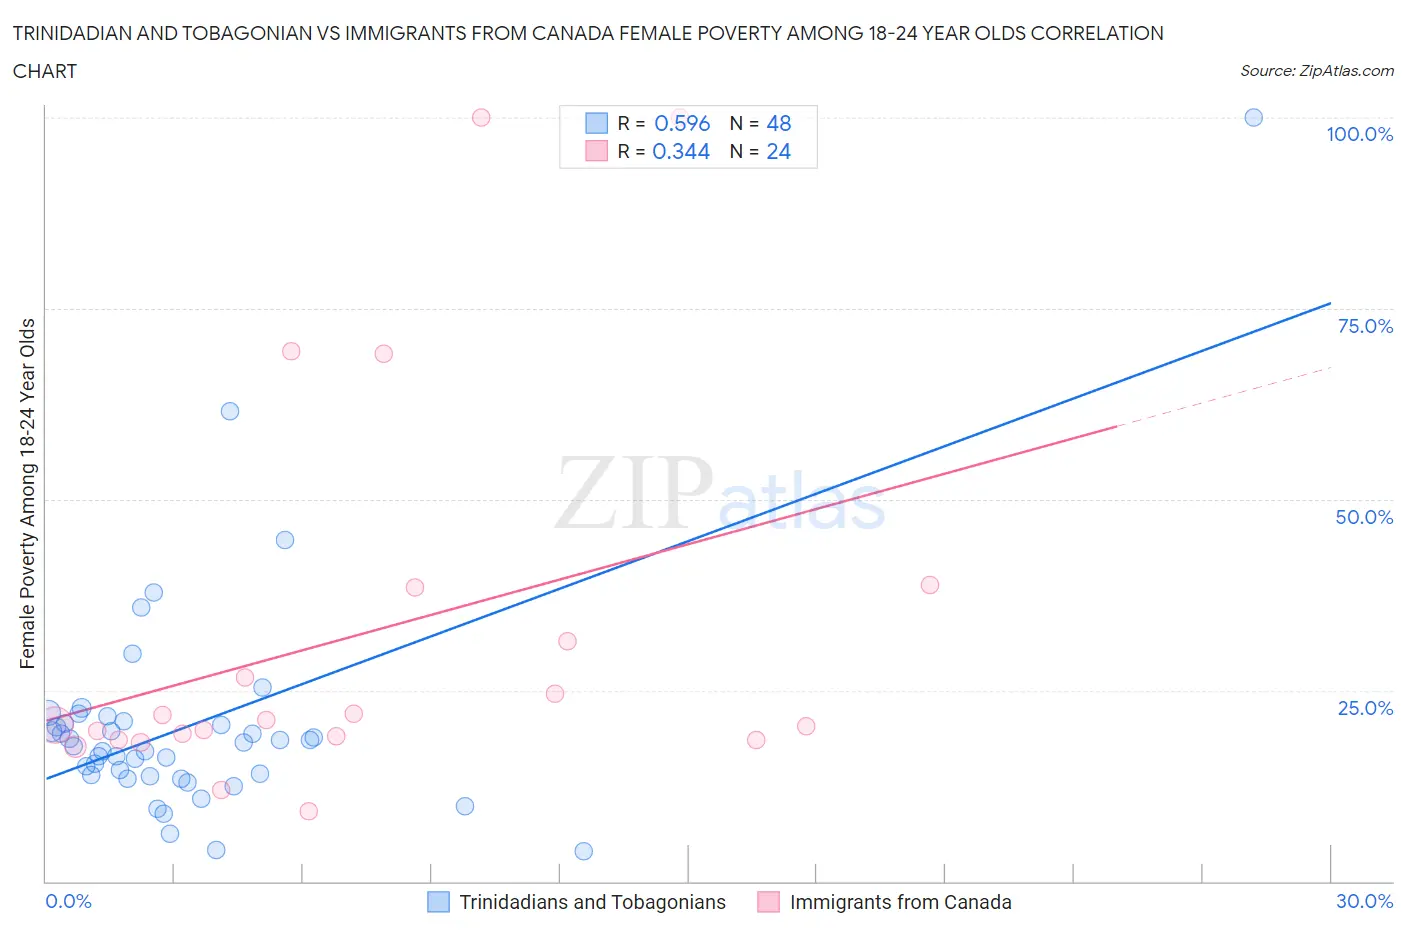 Trinidadian and Tobagonian vs Immigrants from Canada Female Poverty Among 18-24 Year Olds